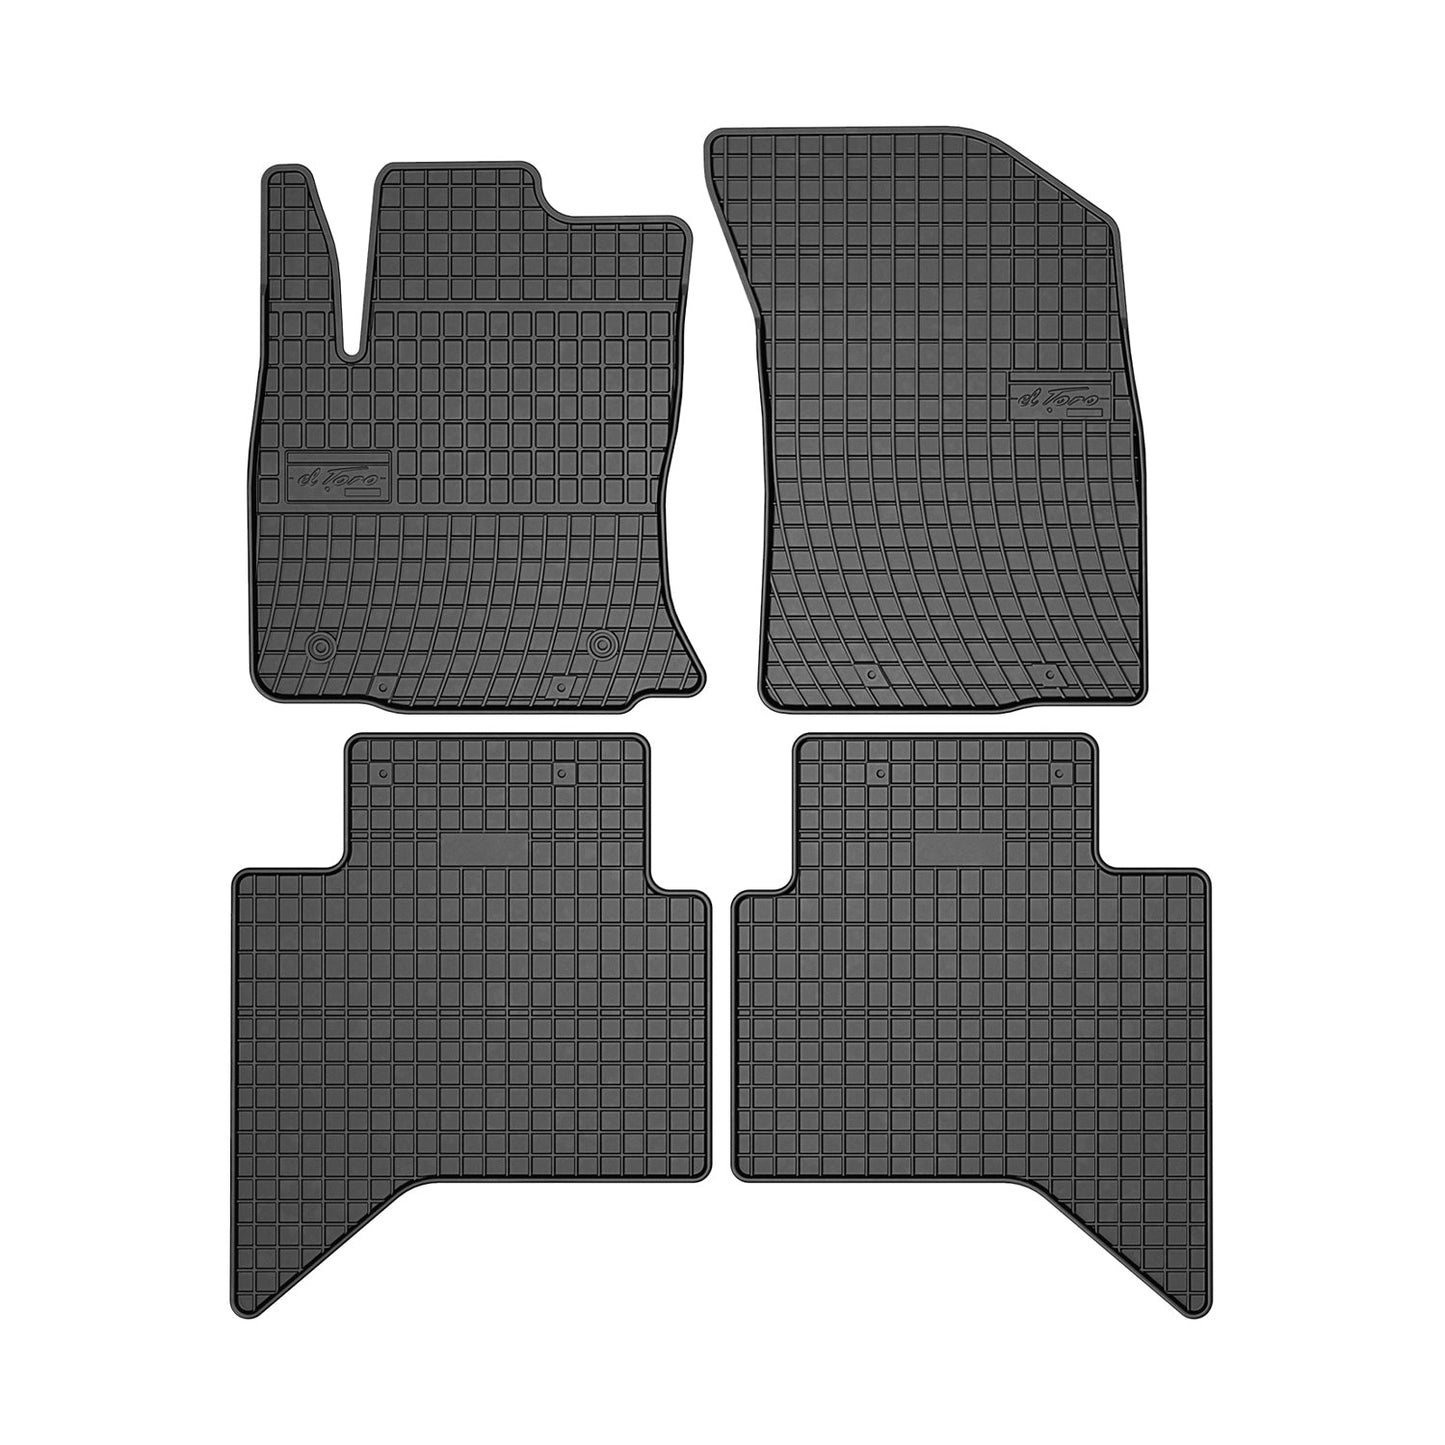 OMAC OMAC Floor Mats Liner for Toyota Hilux 2016-2023 Black Rubber All-Weather Rubber '7025484